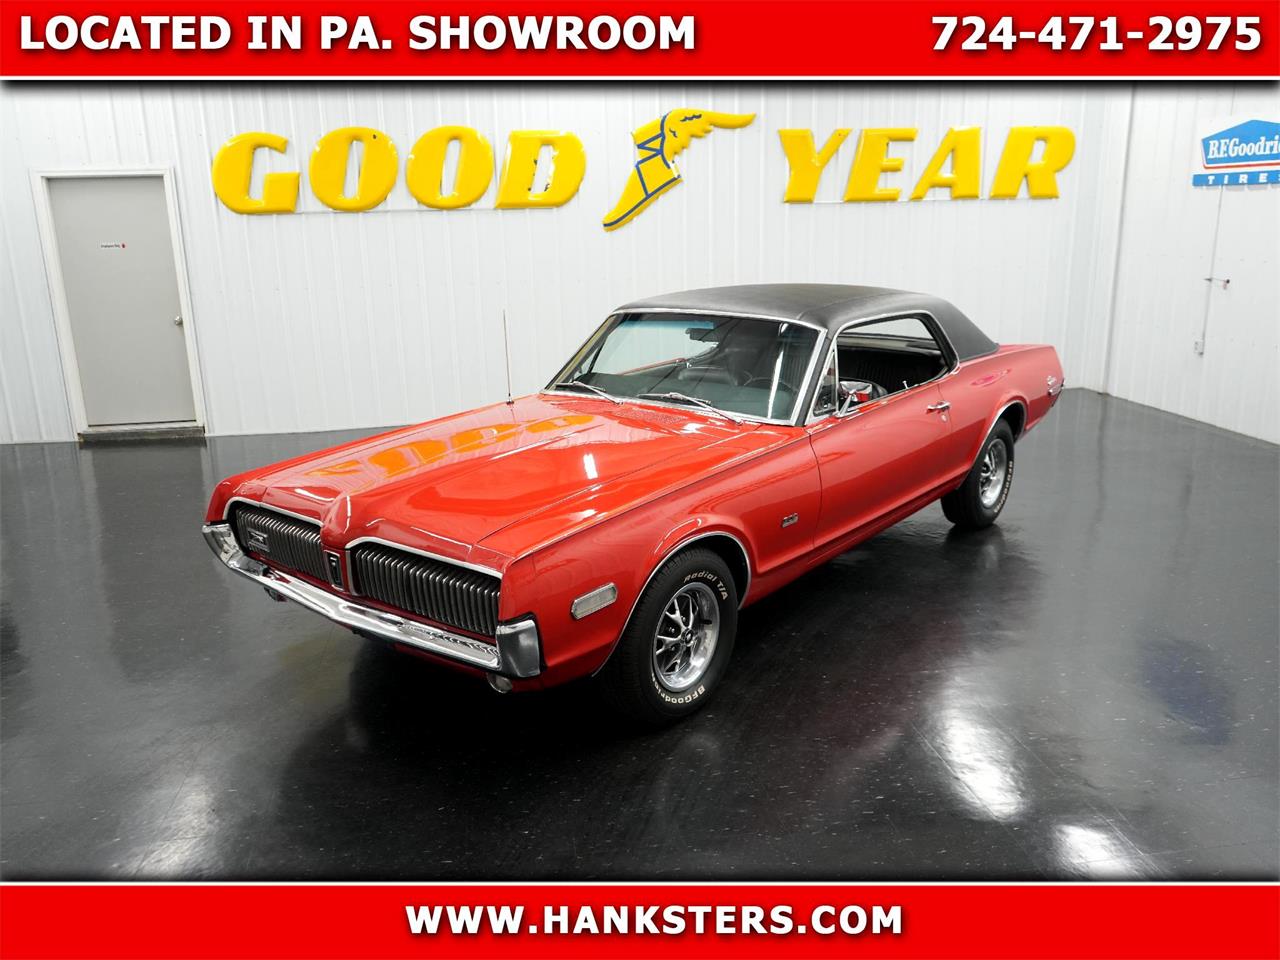 For Sale: 1968 Mercury Cougar in Homer City, Pennsylvania for sale in Homer City, PA